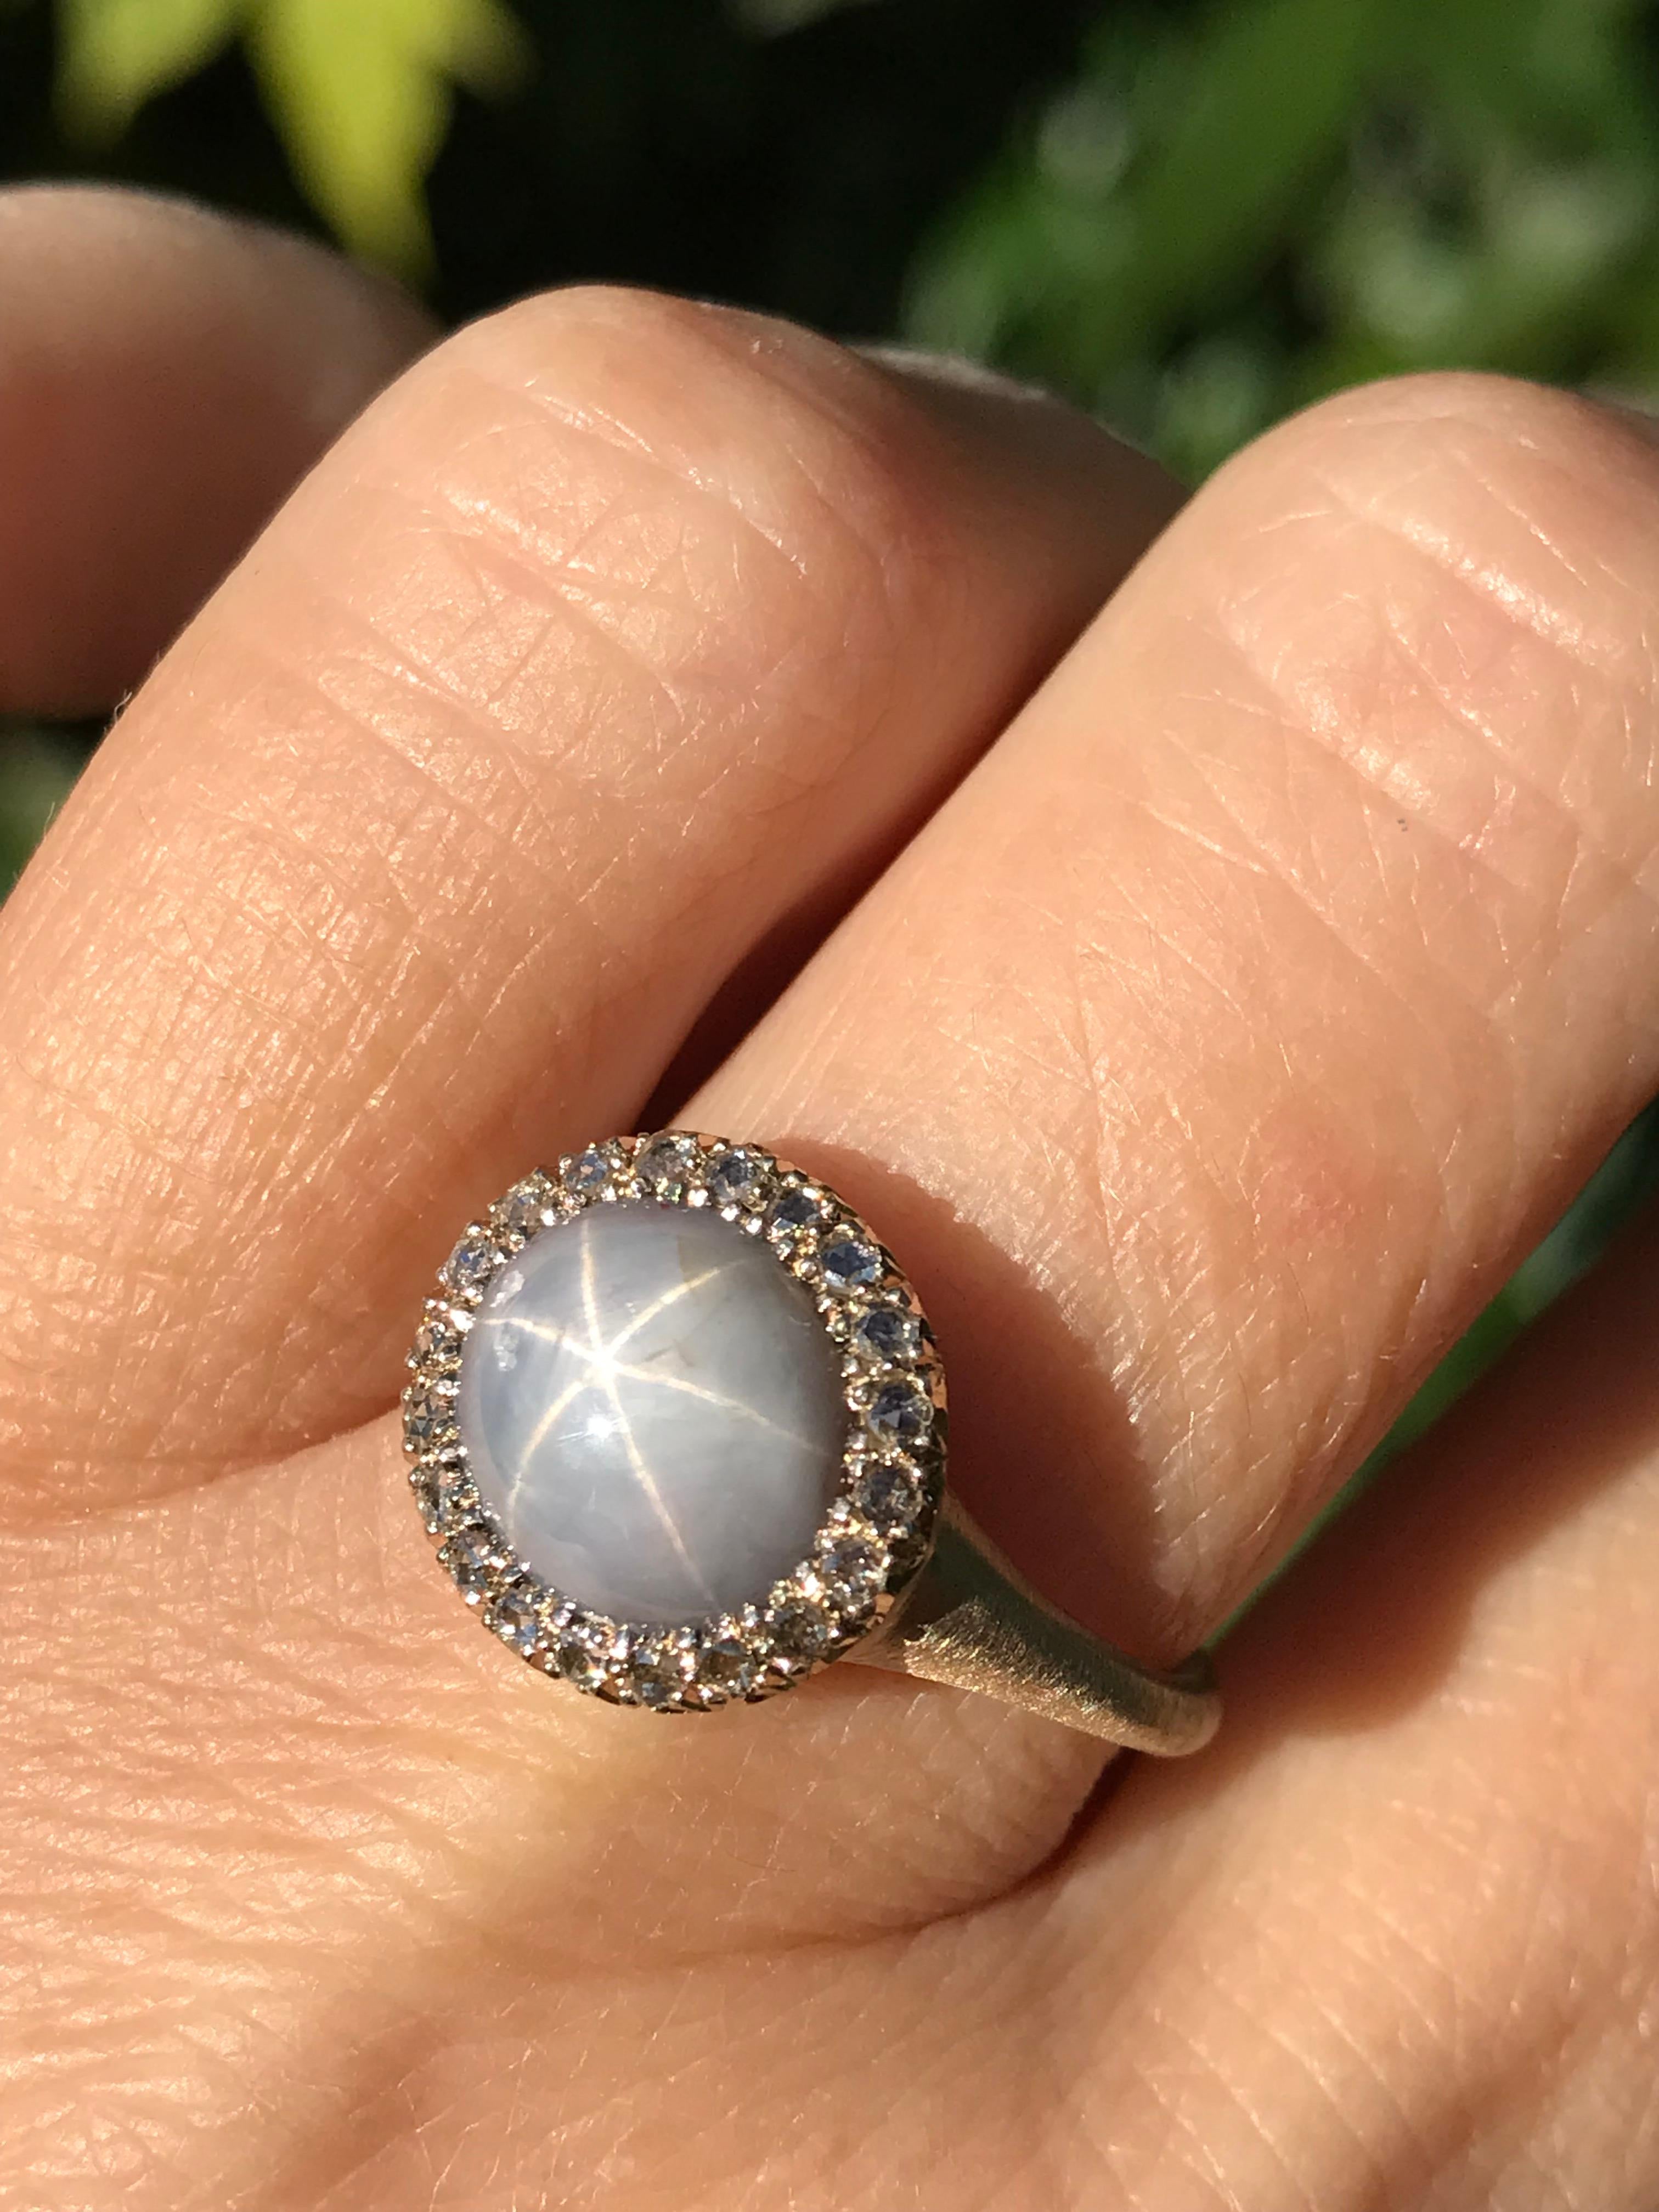 Dalben design  18 kt white gold satin finishing ring with an oval cabochon cut silver star sapphire  weight 7,03 carat and 24 rose cut white diamonds weight 0,18 carats. 
The sapphire star is visible at sunshine or with a spot / direct light , at